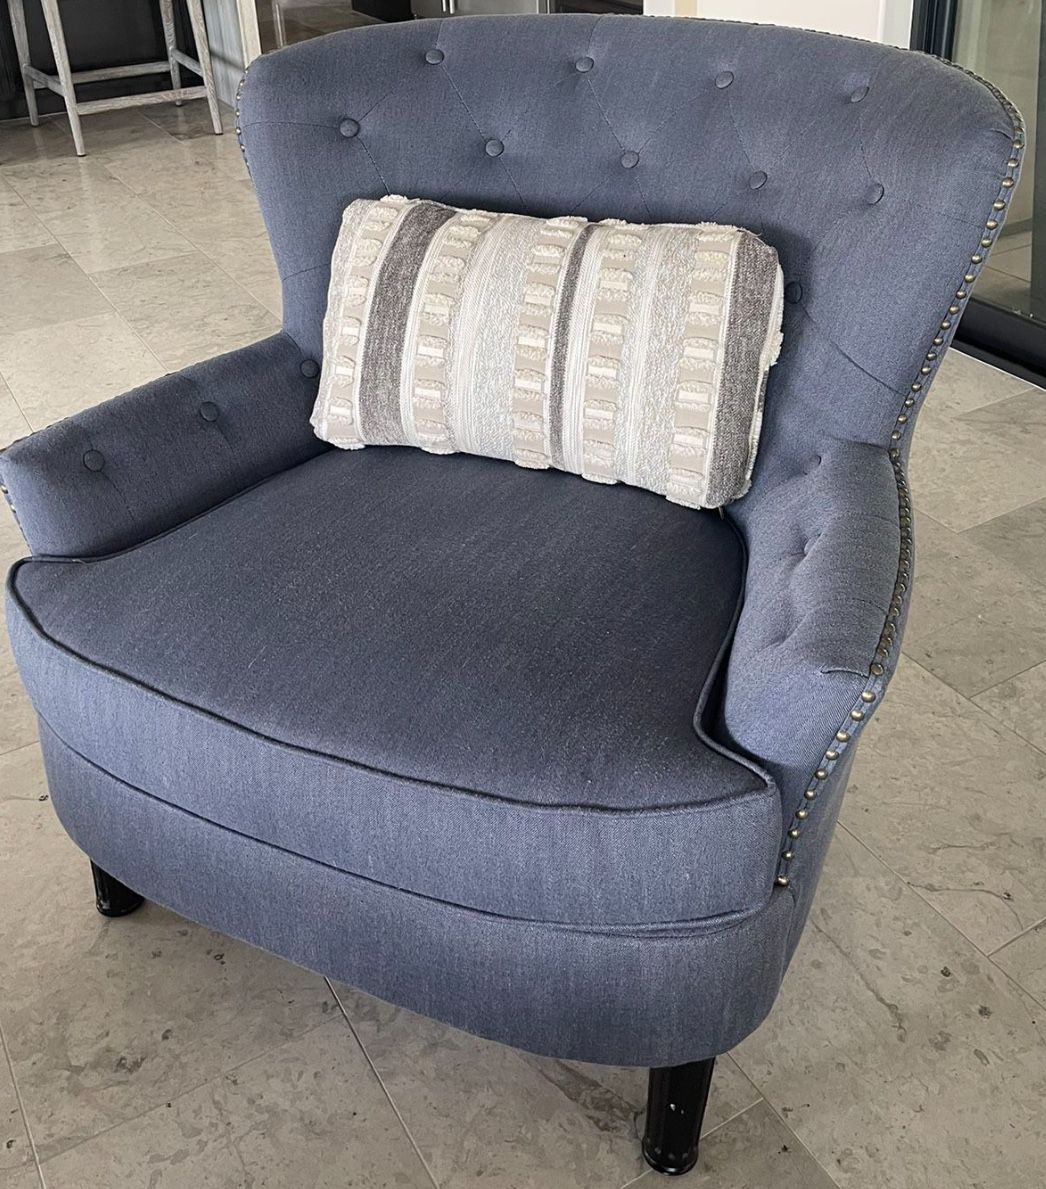 2 Pier 1 Armchair/ Accent chair / Like new condition. 38" wide x 40" deep × 35" high. Seat height 19". Seat depth 25". 